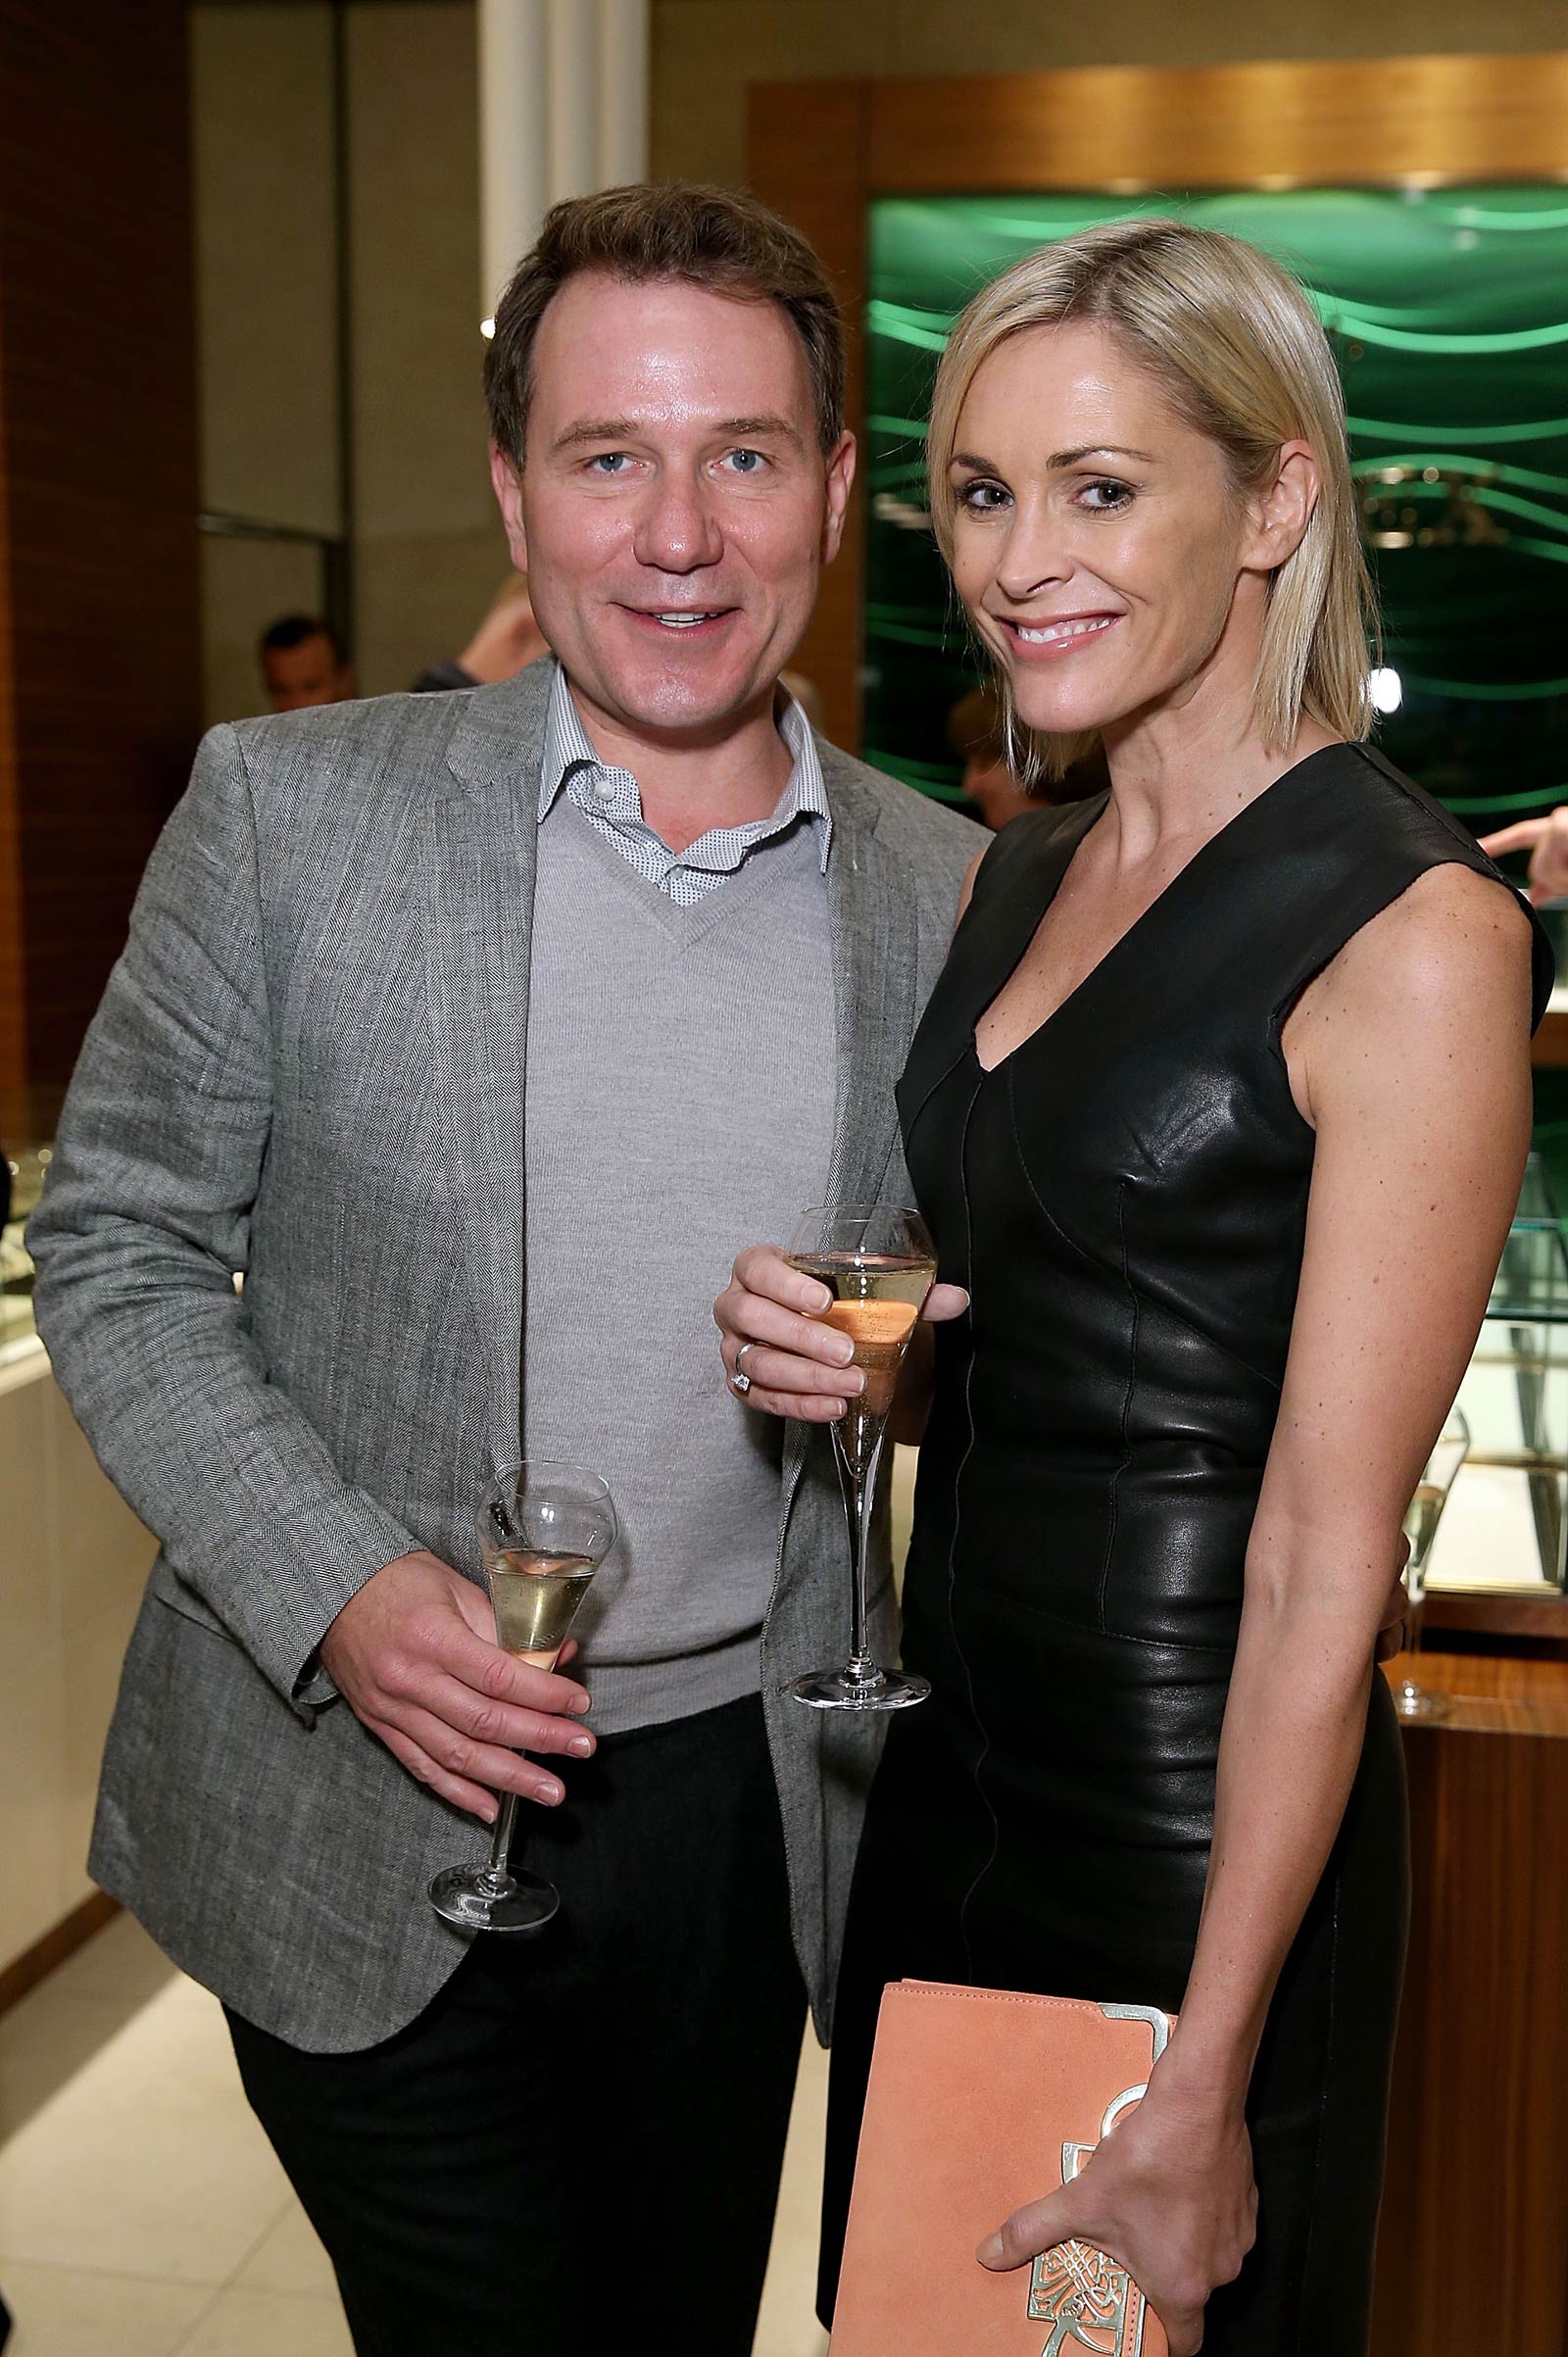 Jenni Falconer attends Hospice Charity Event